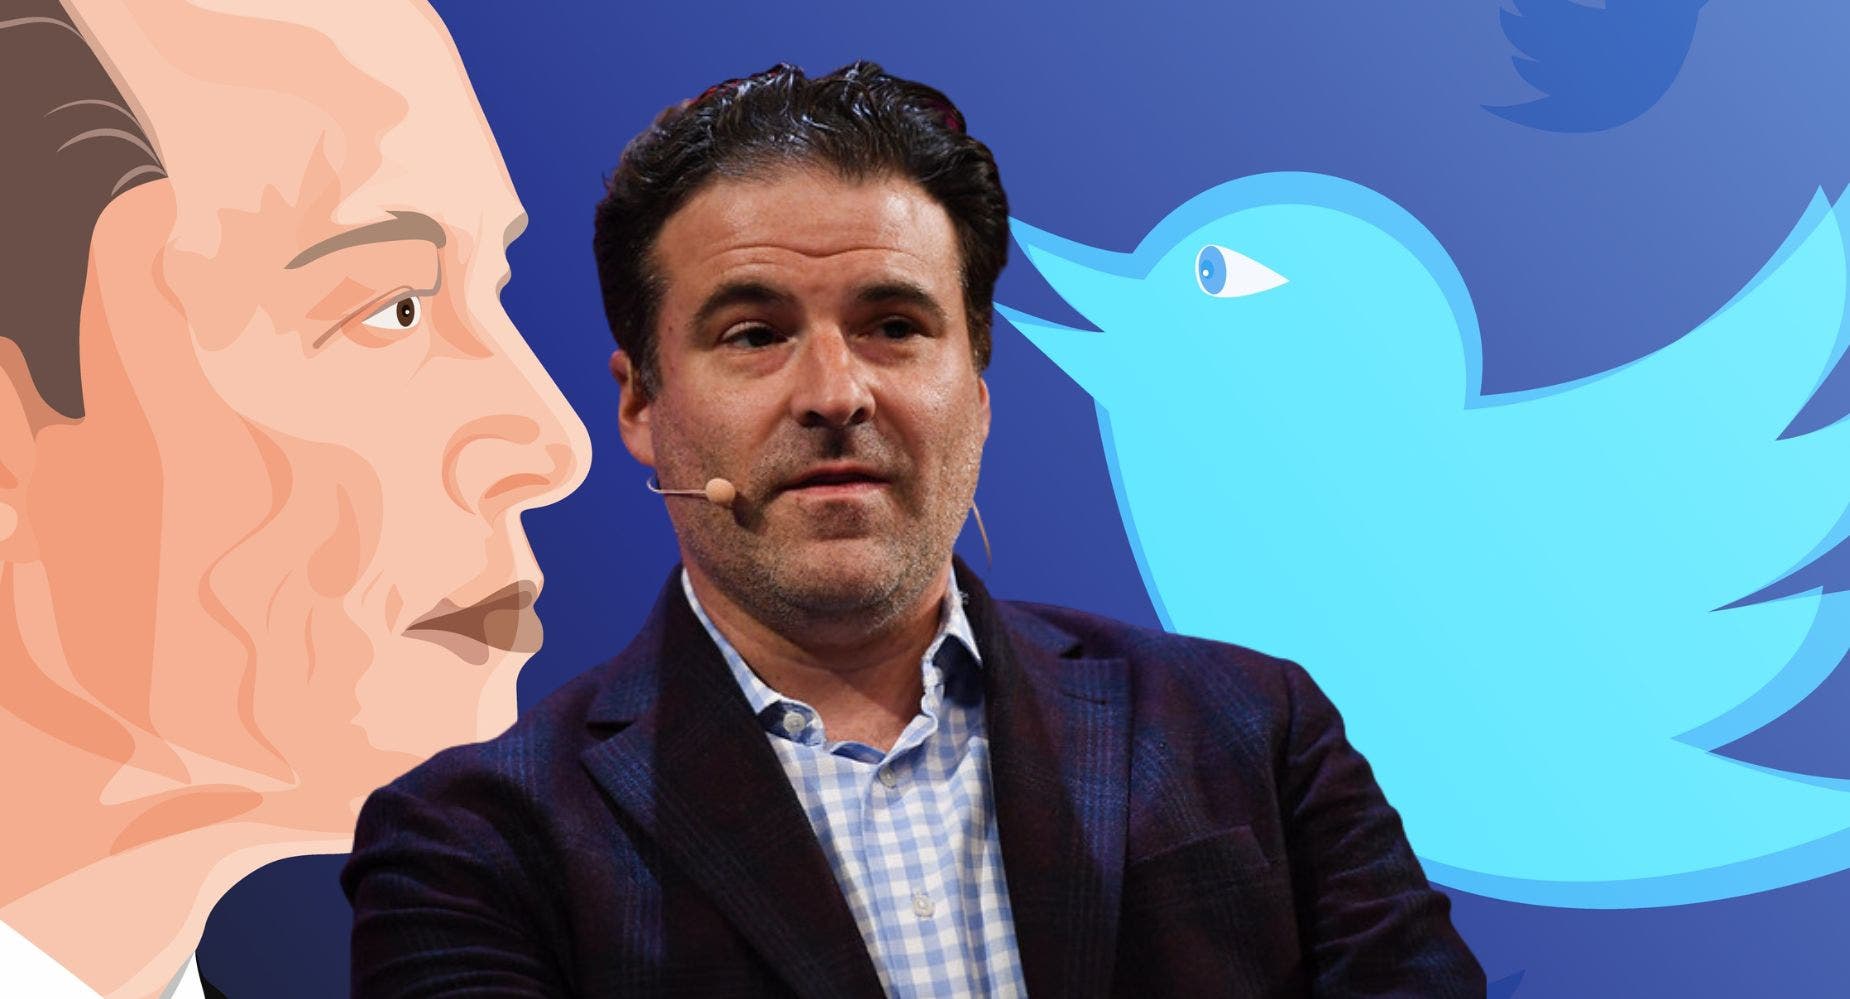 'When You Log Onto Twitter You Get Punched In The Face': Darren Rovell Not Impressed With Elon Musk's Acquisition